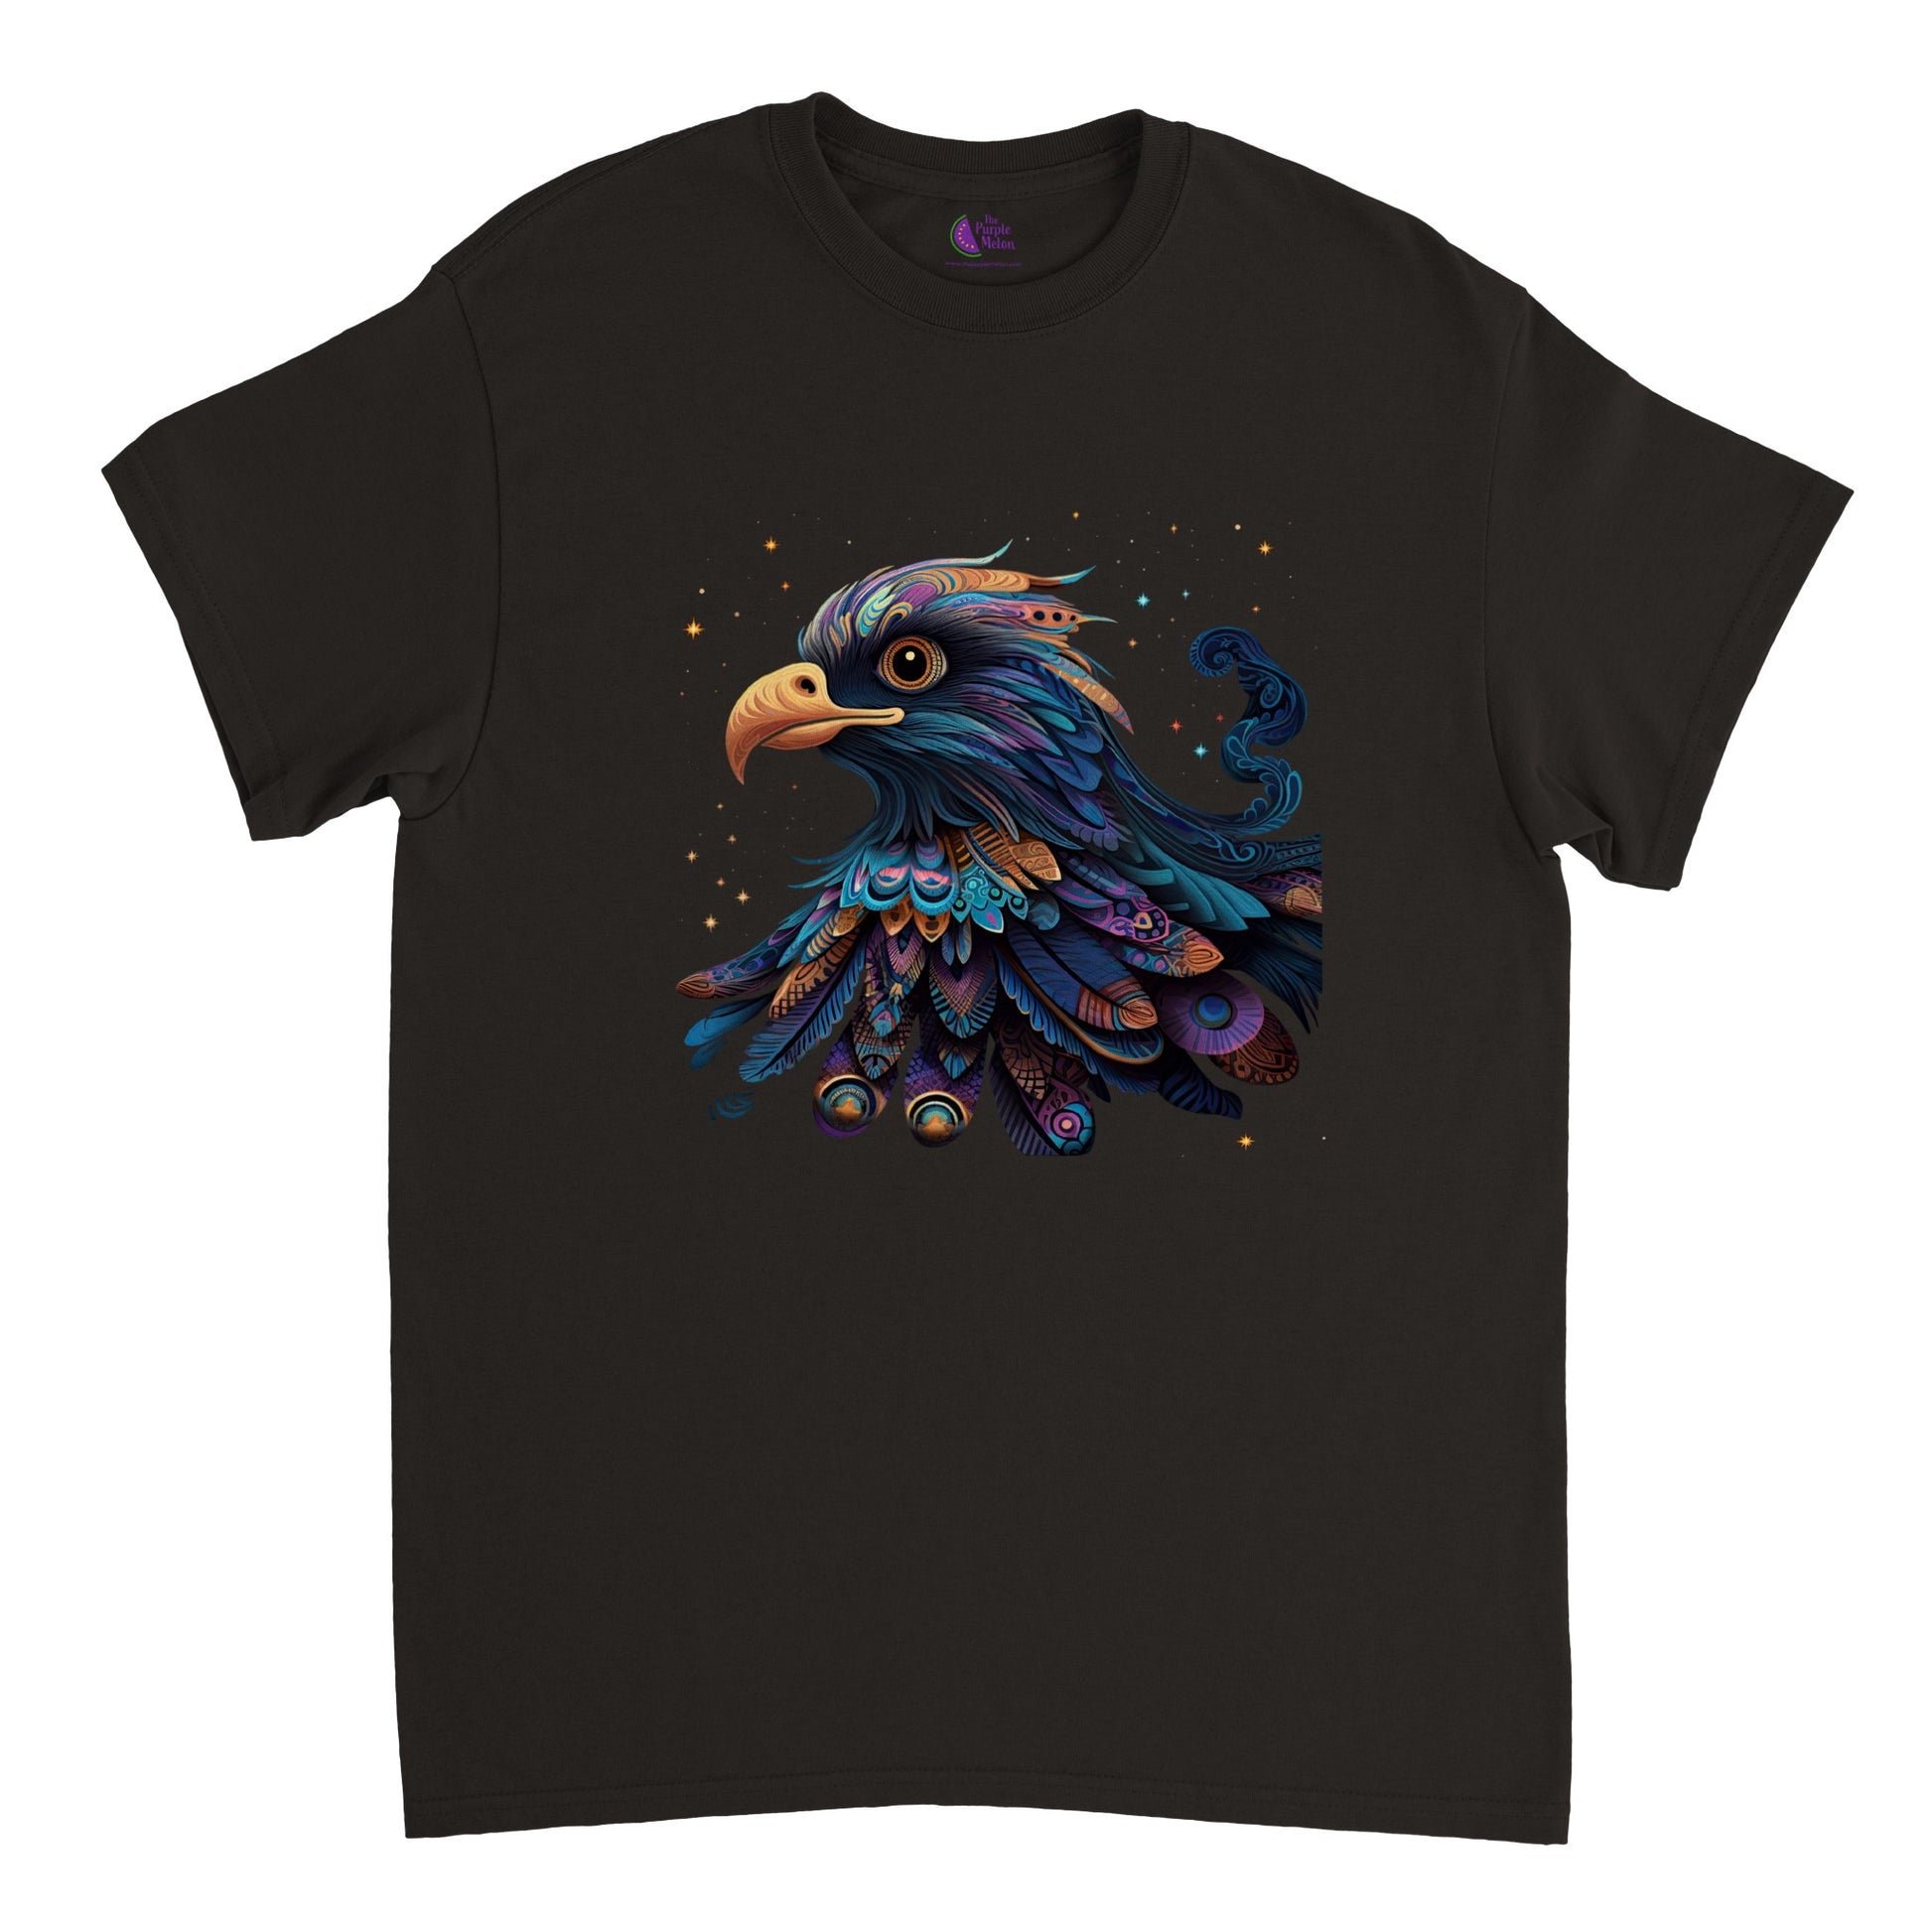 Black t-shirt with a colorful abstract eagle print